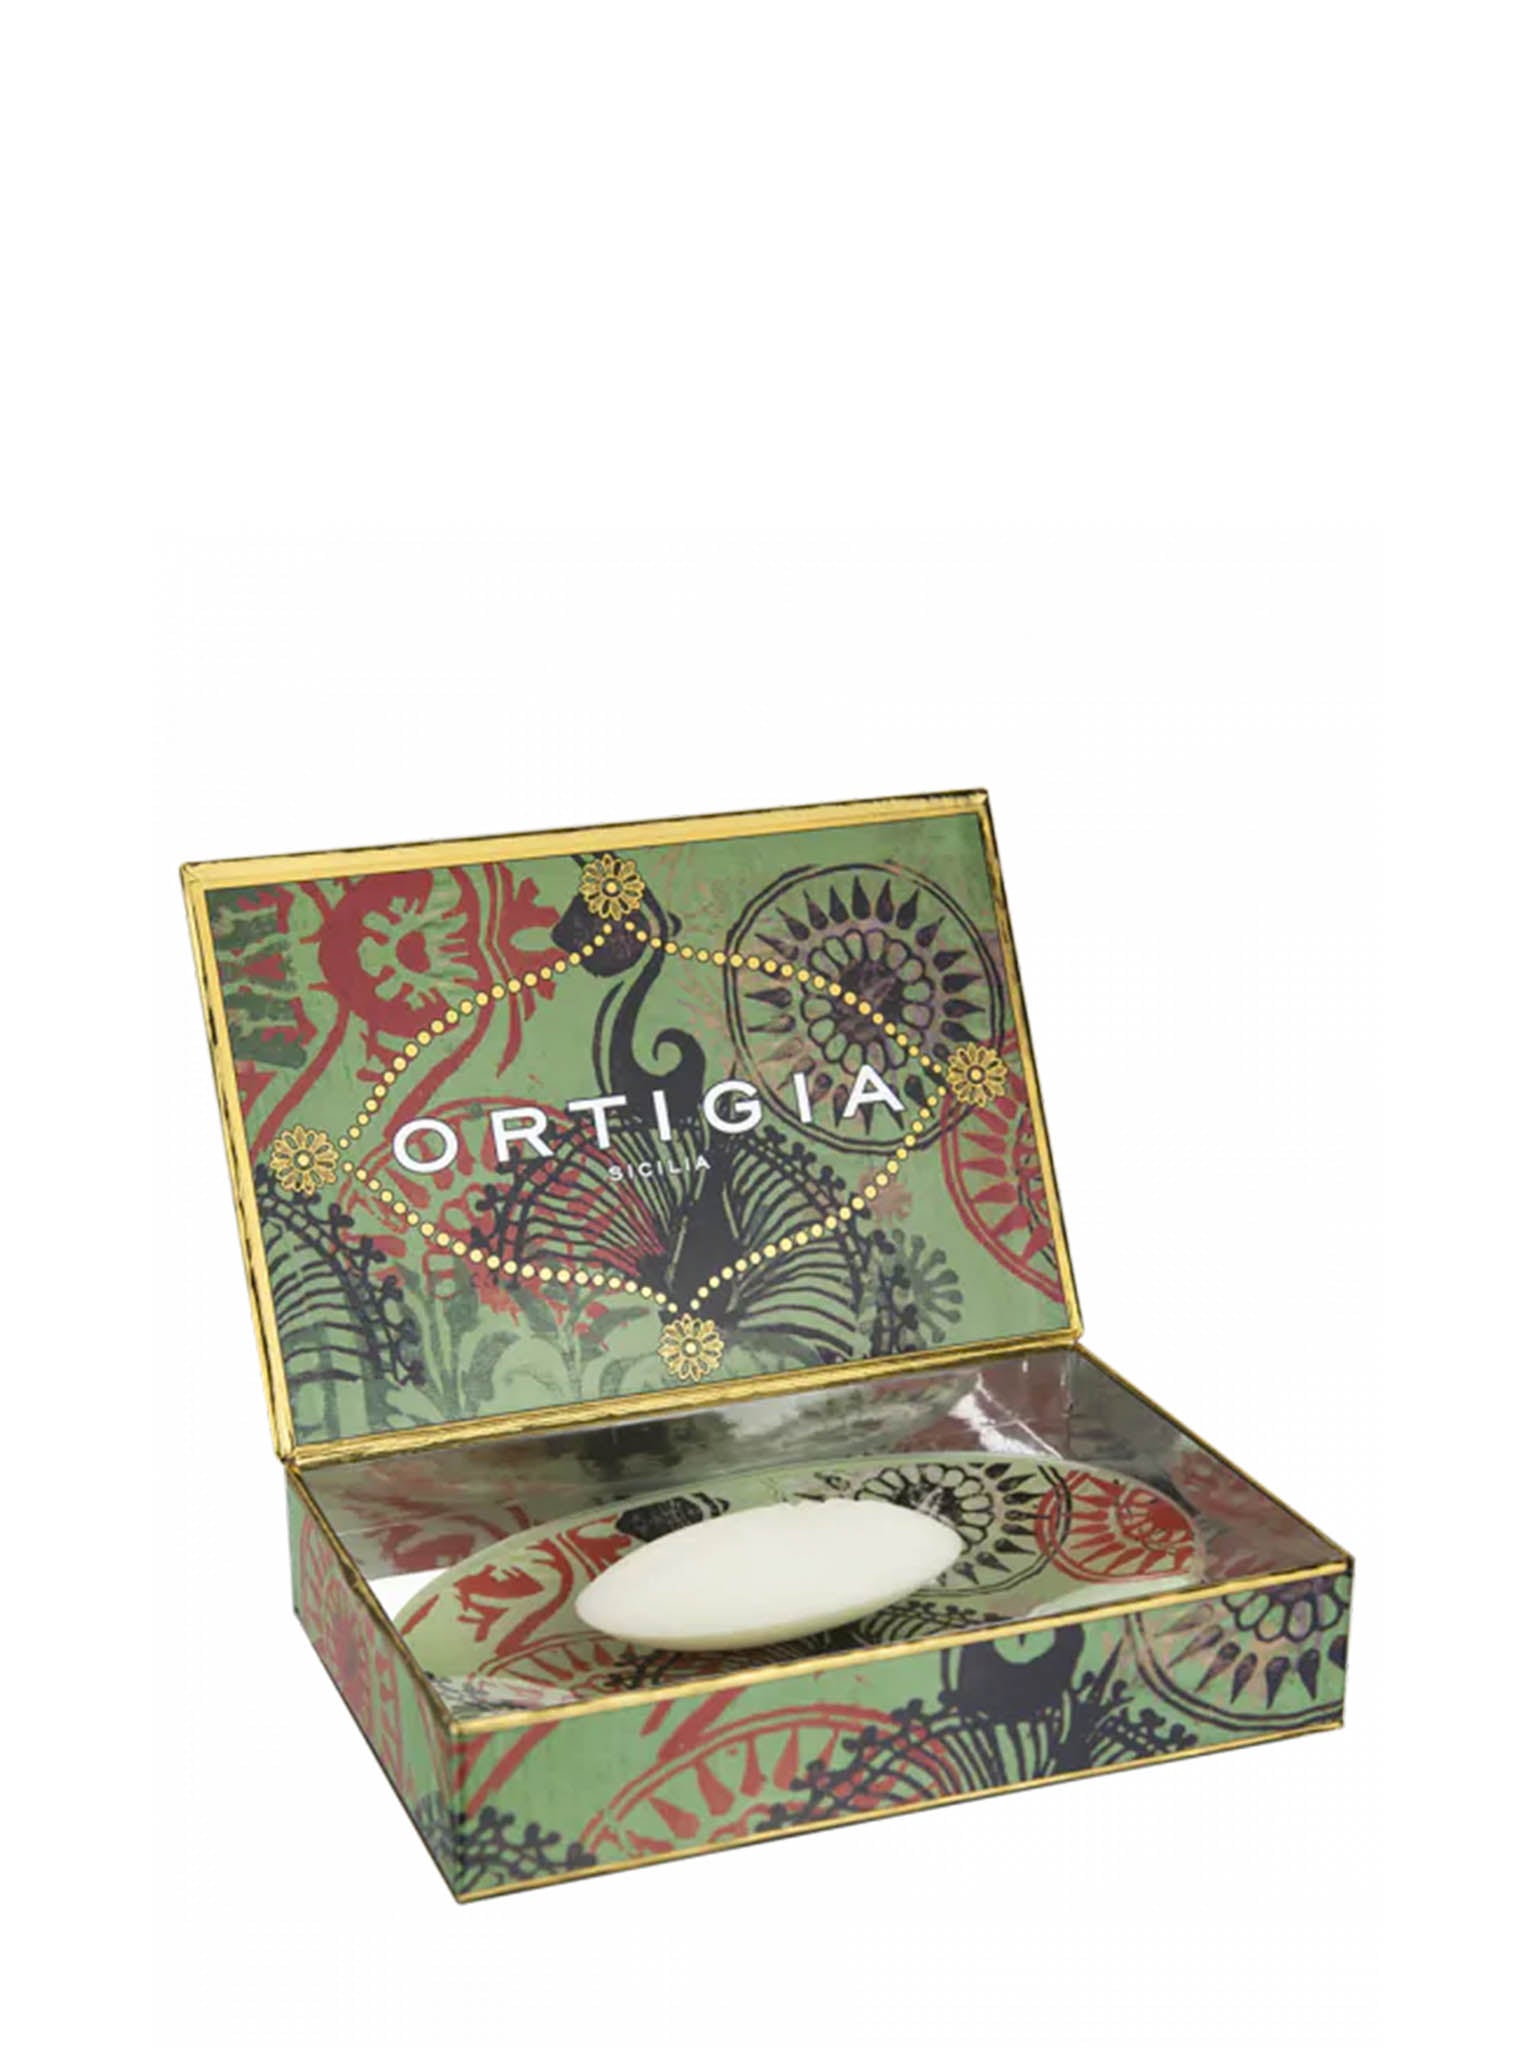 Ortigia Fico D_India Soap  with Glass Soap Dish Cutout in packaging